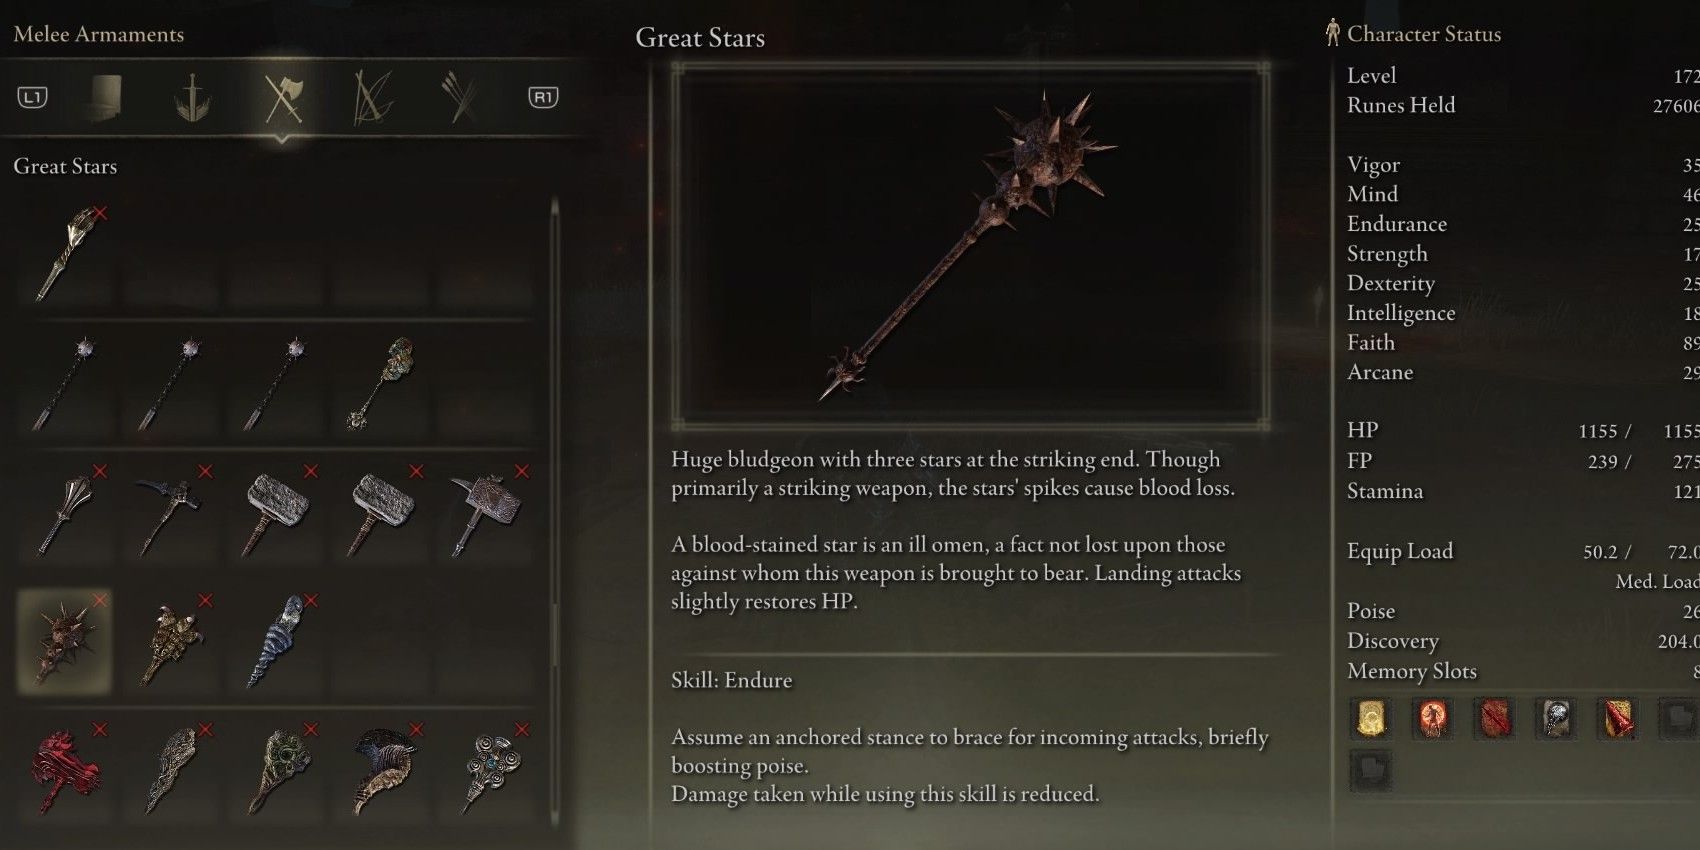 Great Star is an underrated Elden Ring great hammer which heals the player on successful hits.